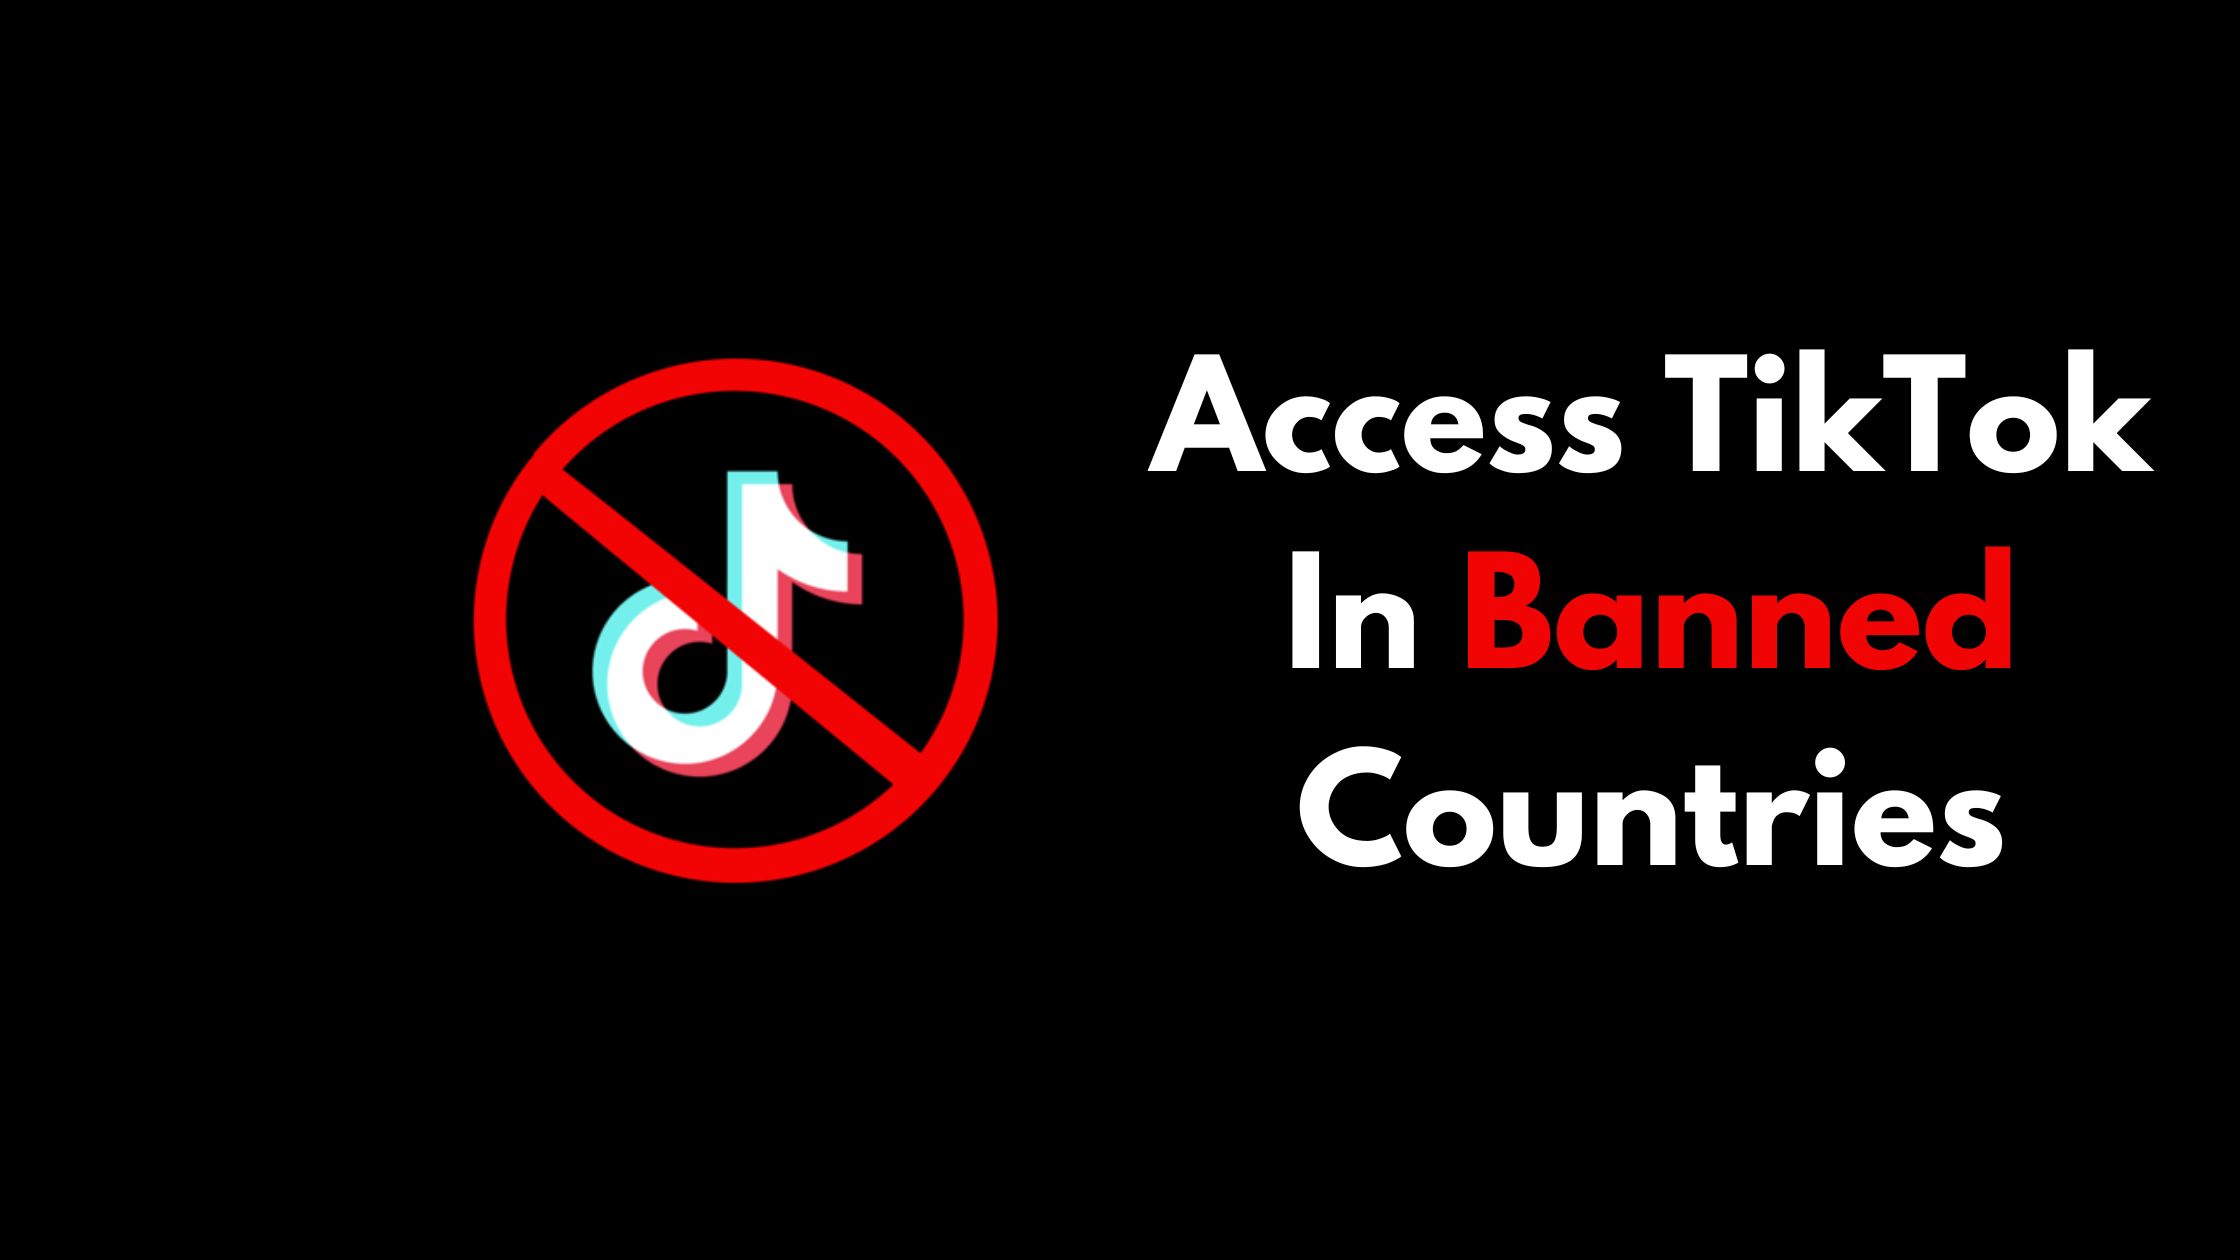 How To Access TikTok In Banned Countries